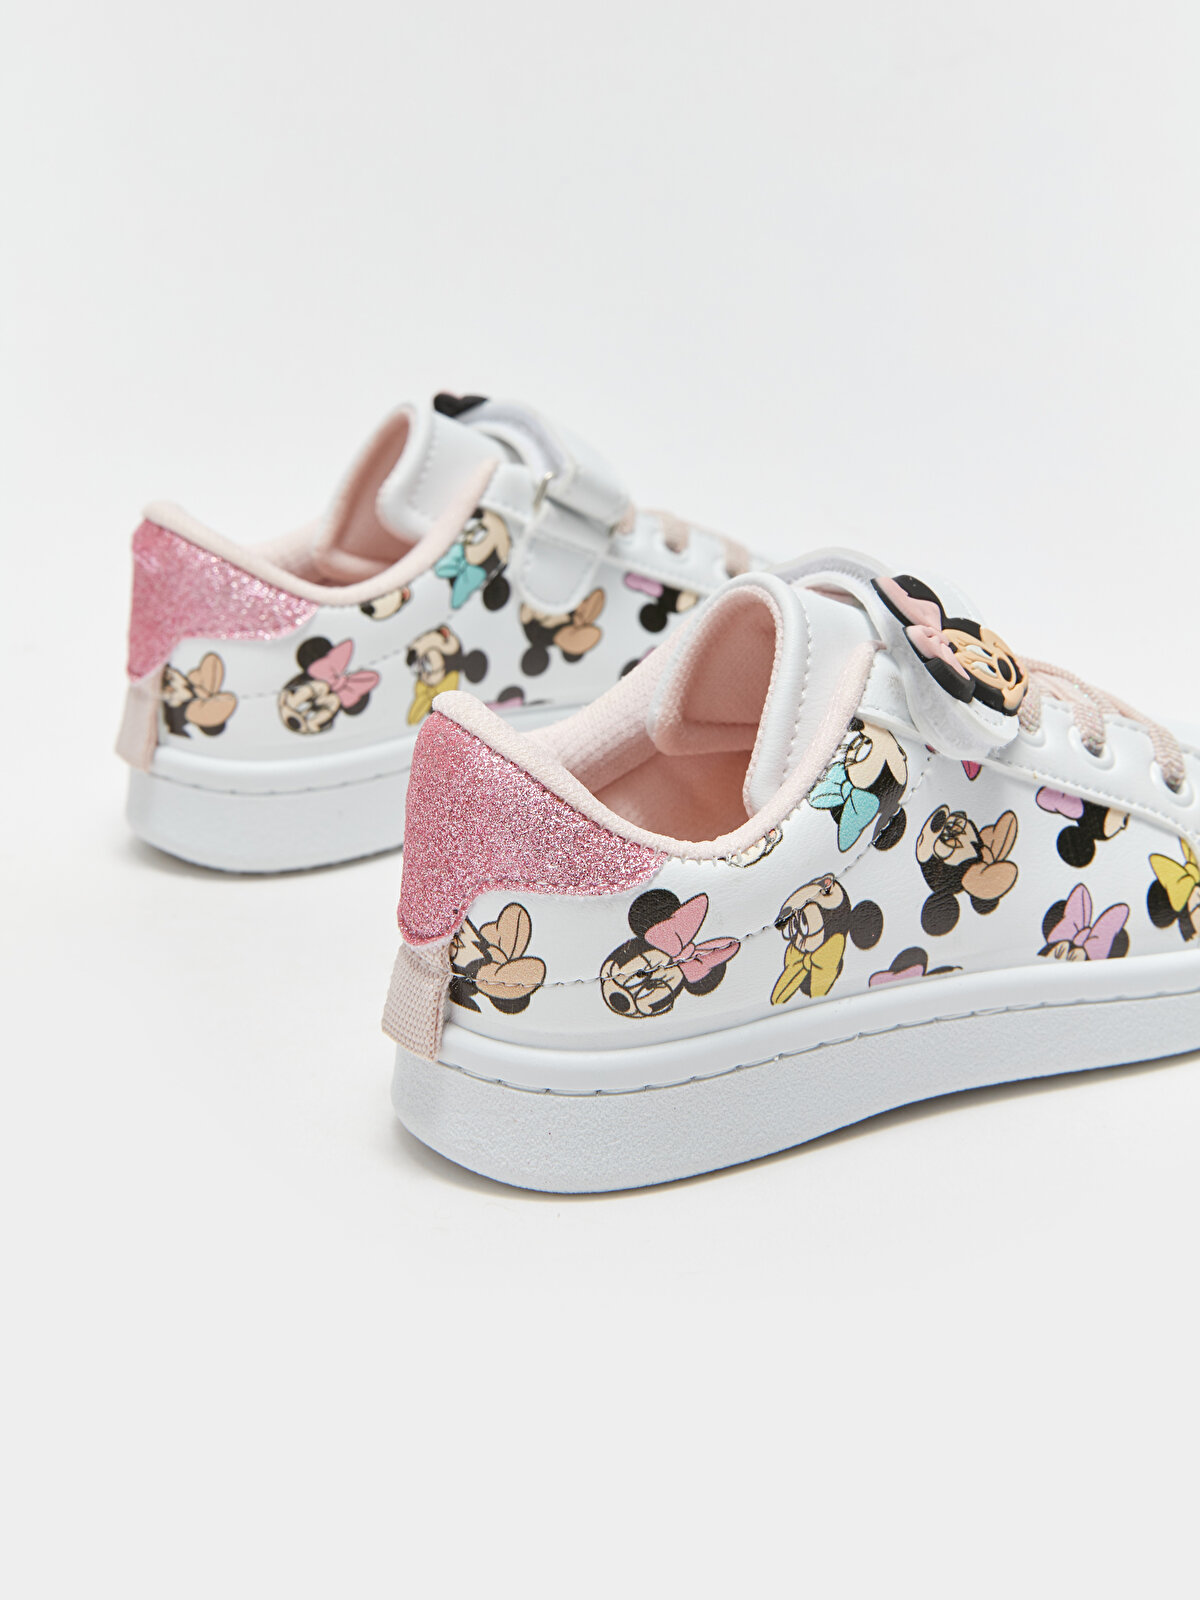 Minnie Mouse Printed Sneakers for the Star Athlete of the Class 